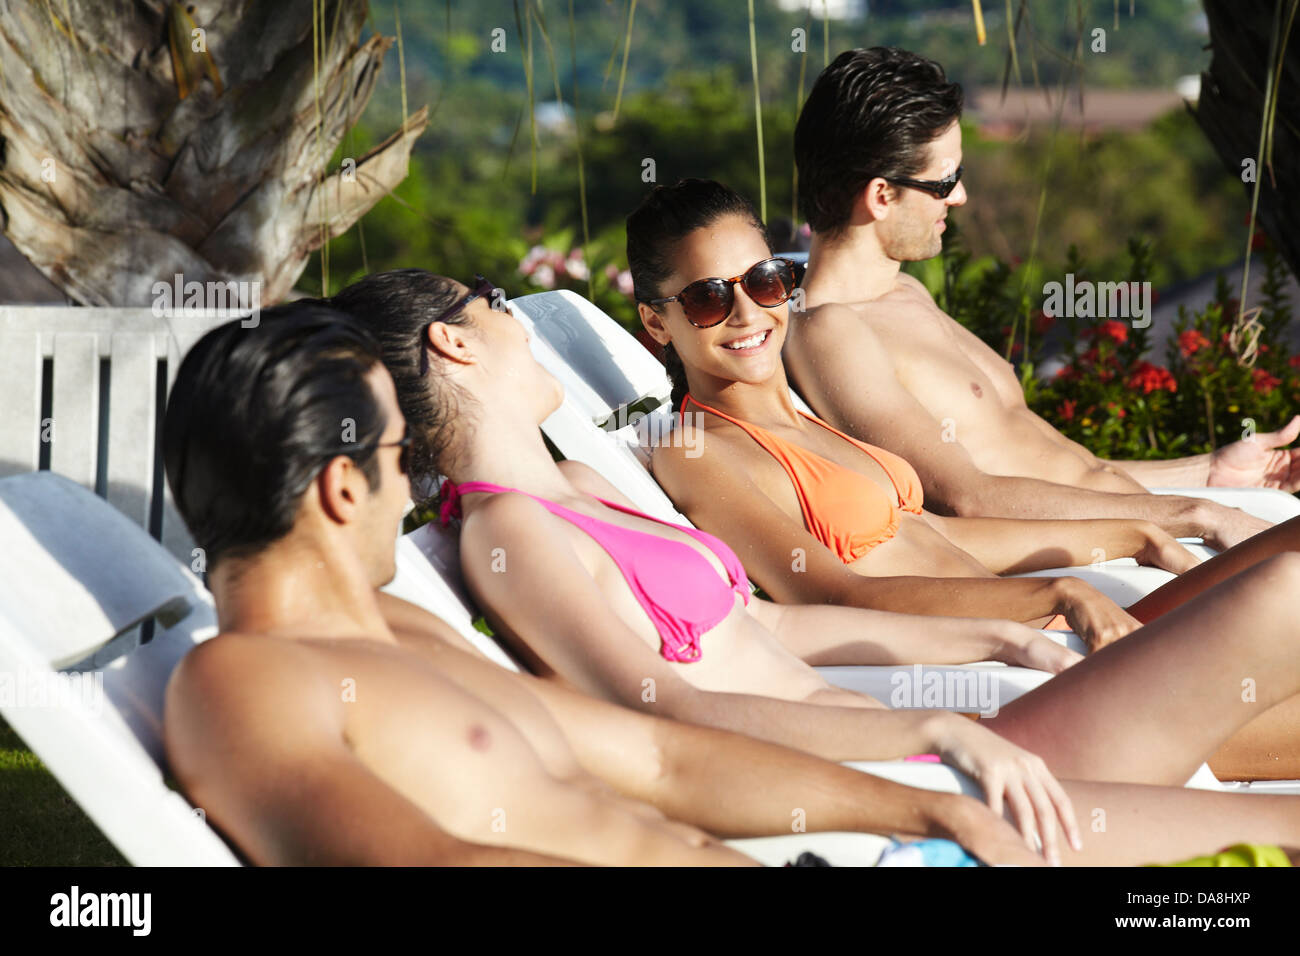 Friends relaxing poolside. Stock Photo